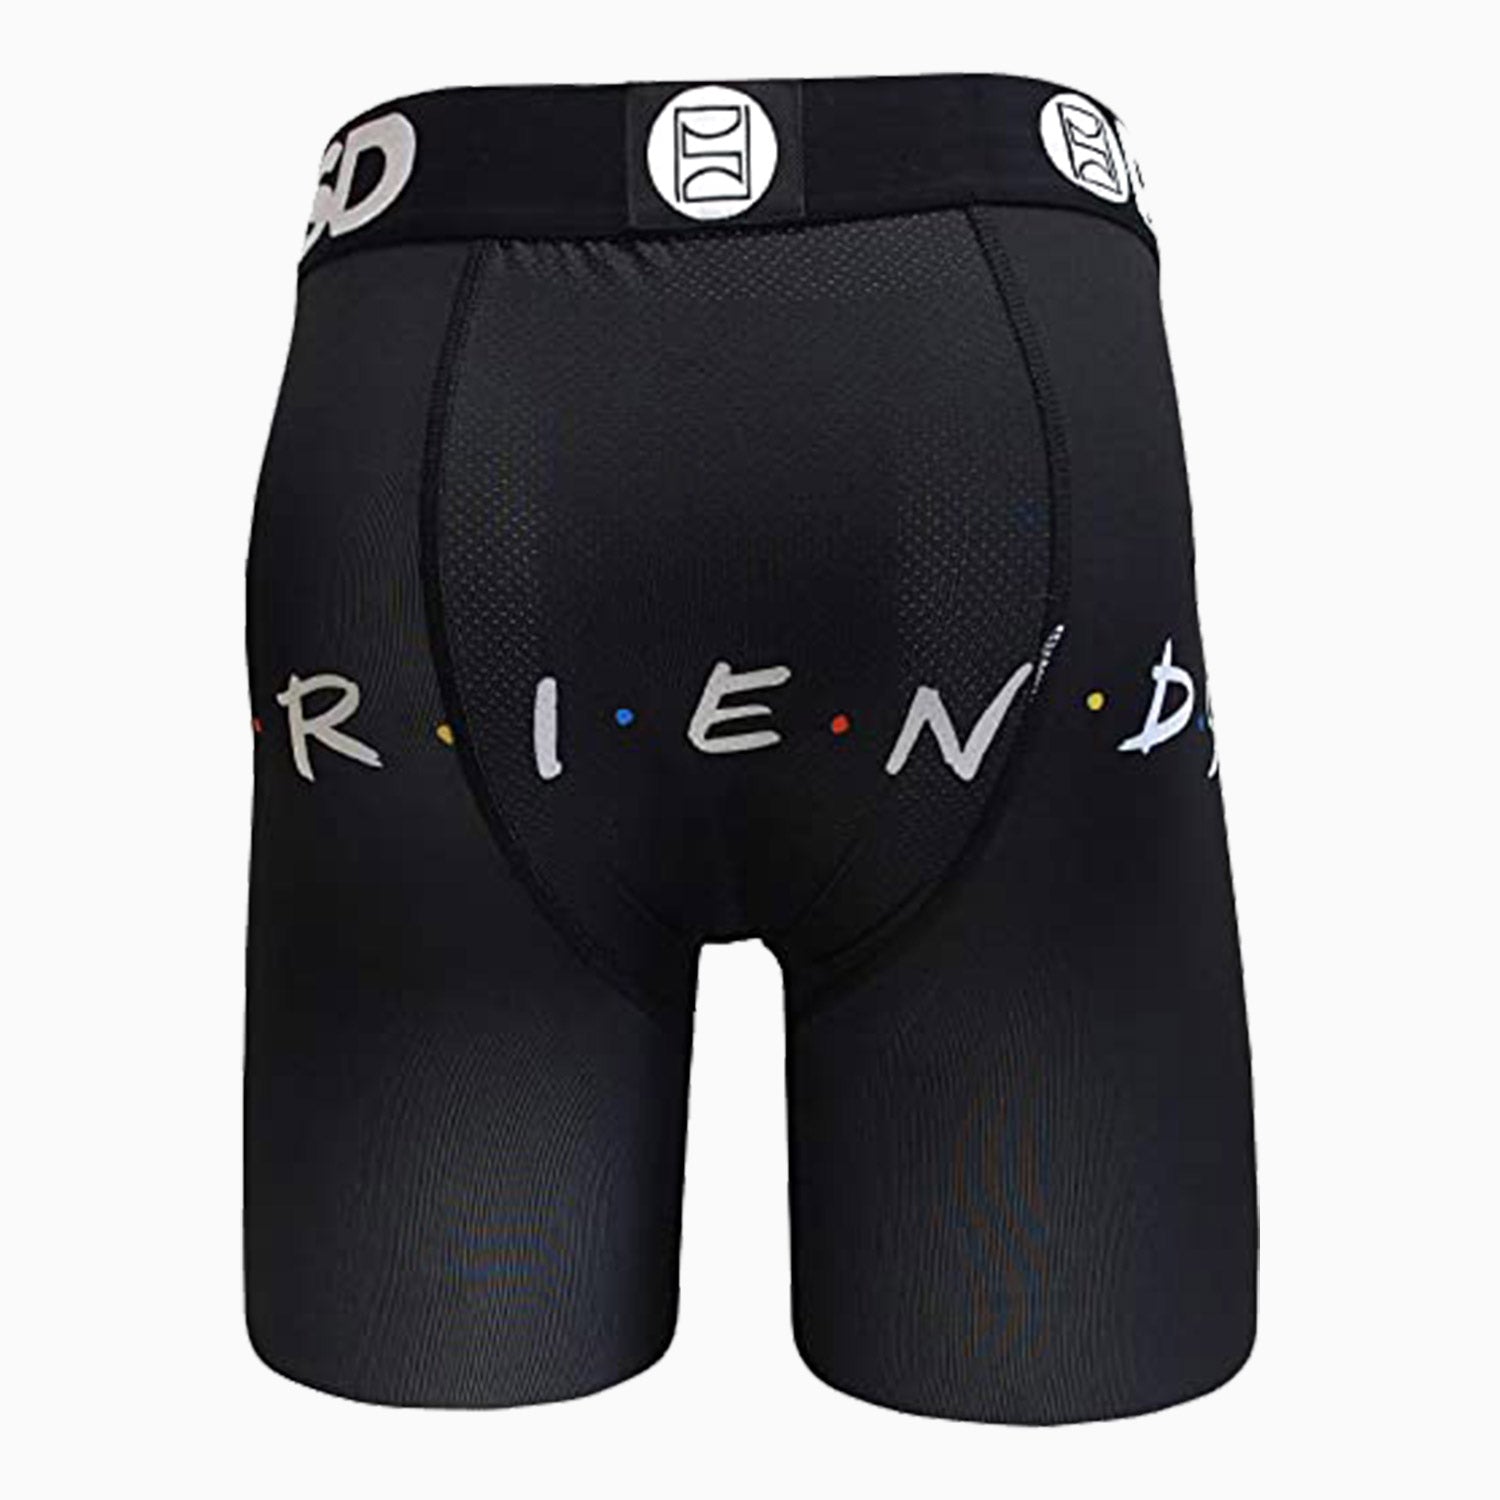 PSD UNDERWEAR | Men's Printed H Friends Boxer - Color: Black - Tops and Bottoms USA -